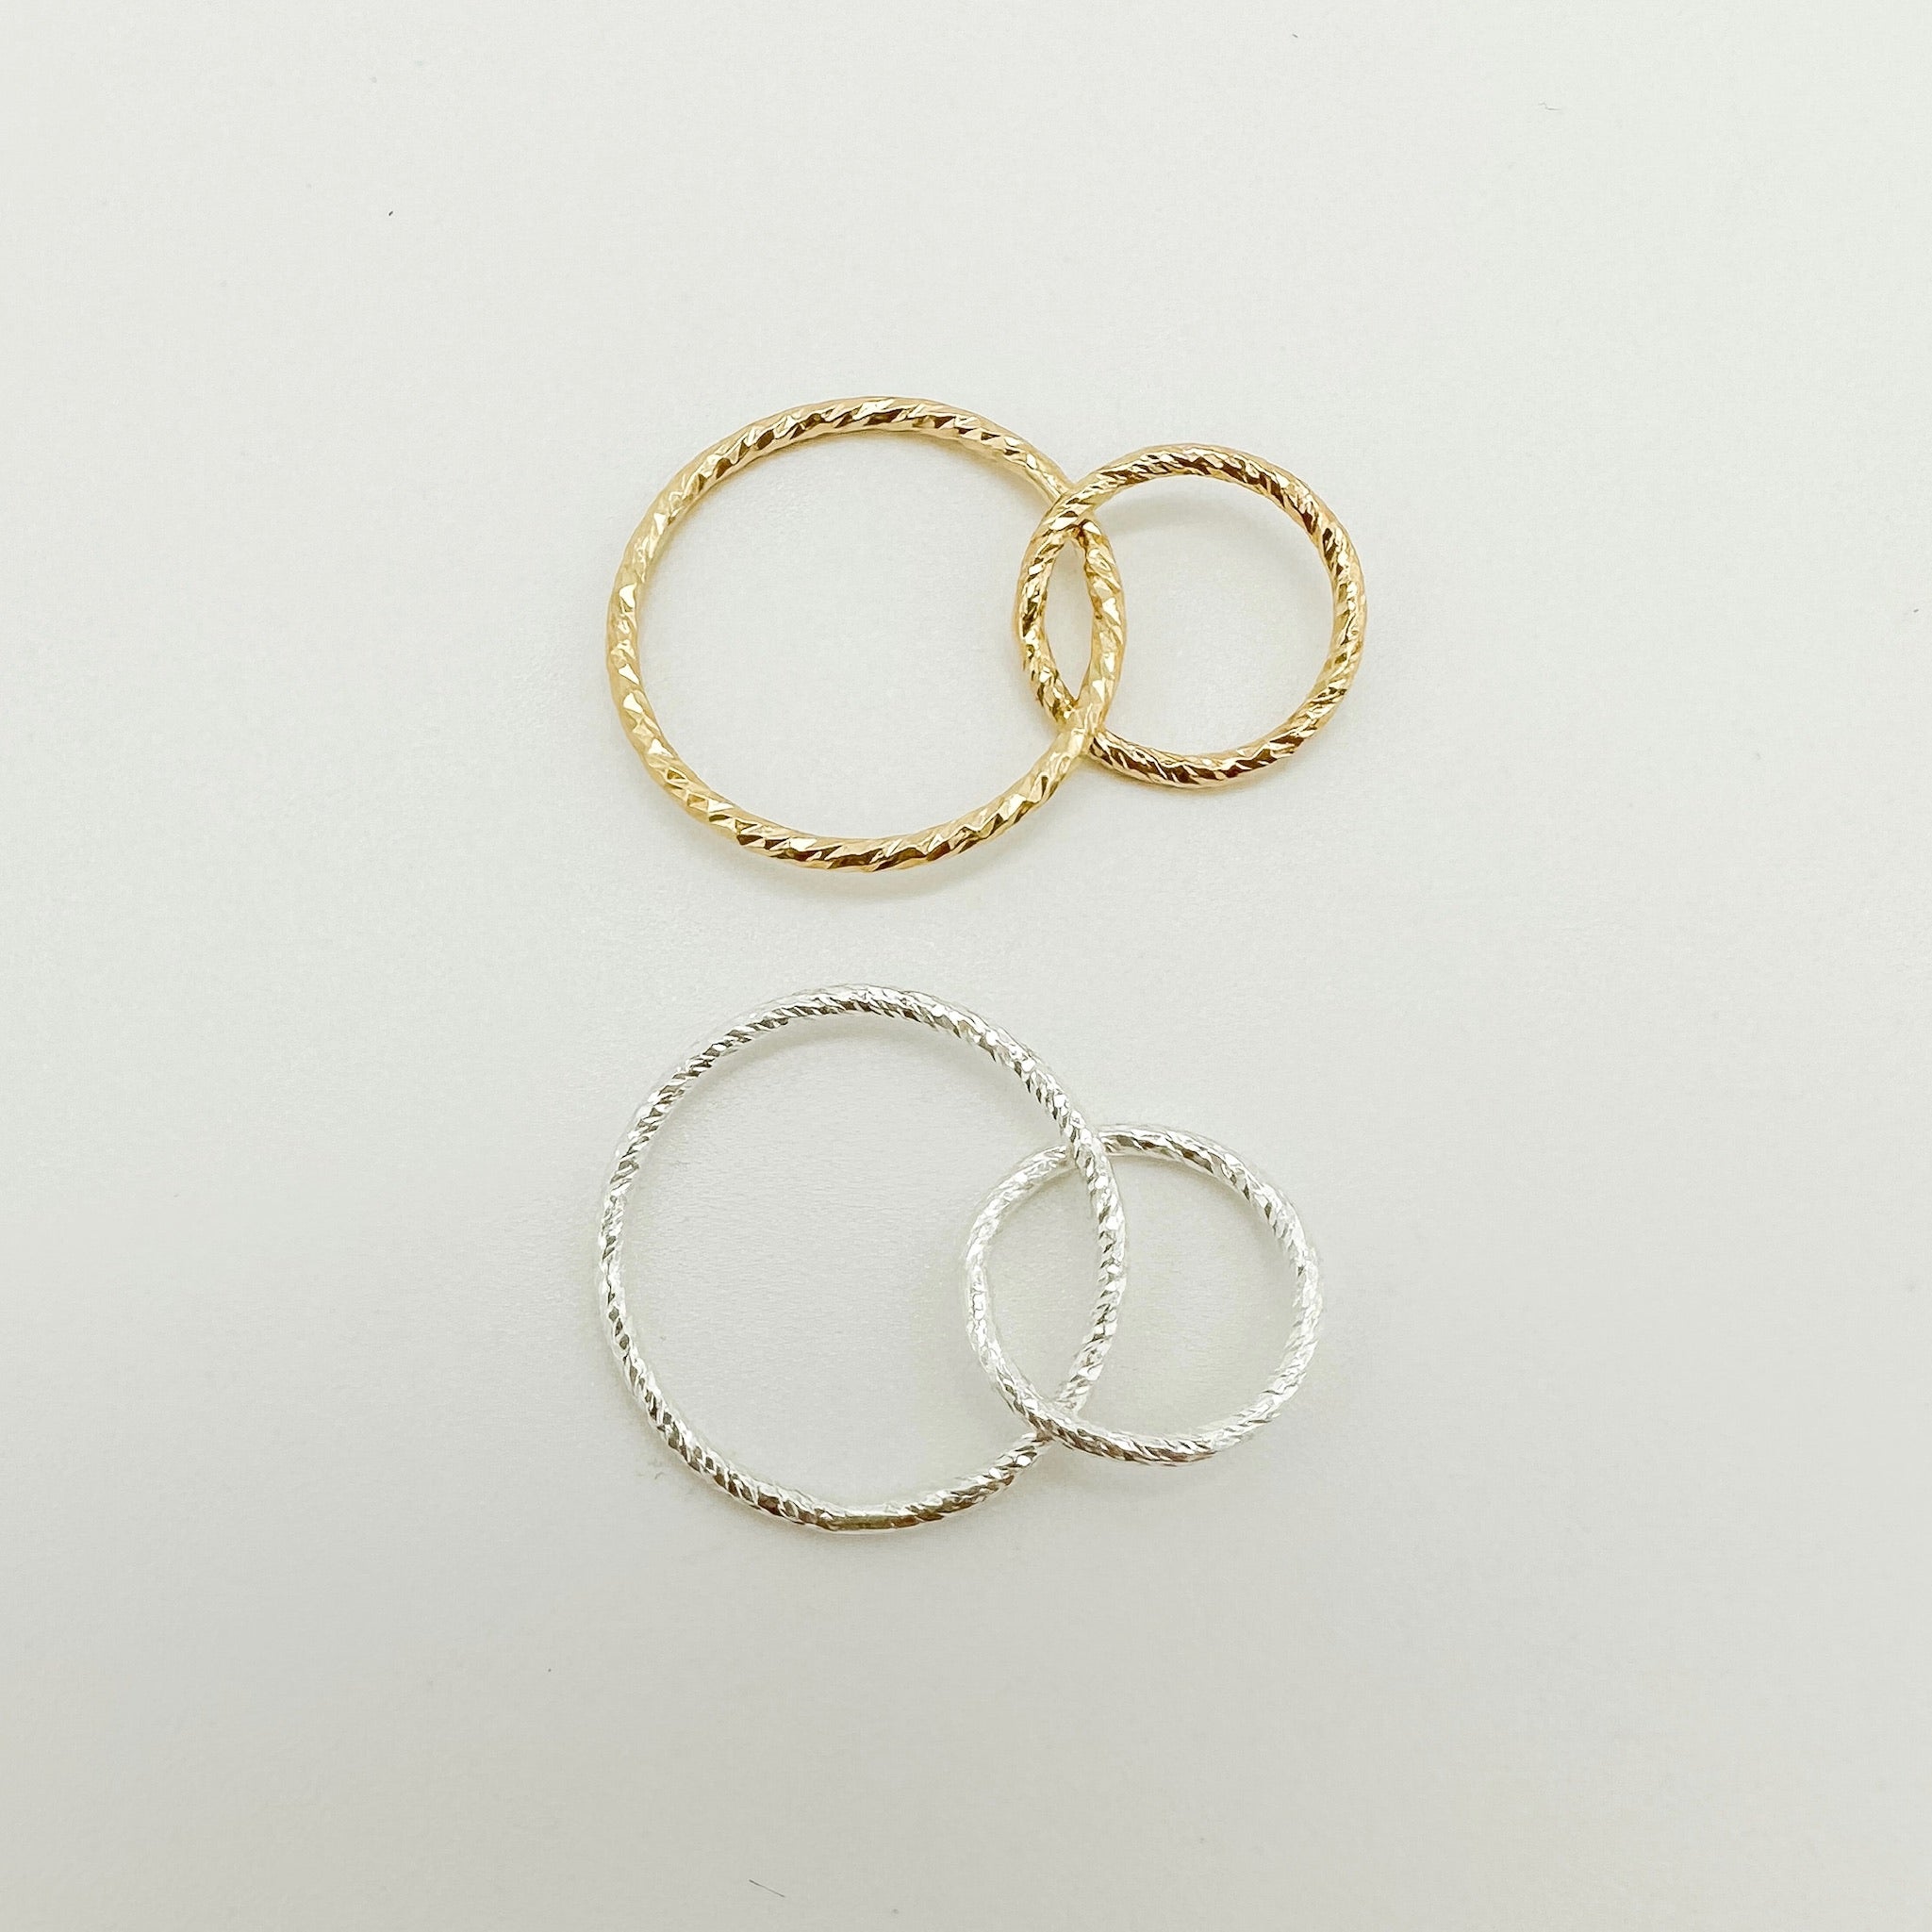 Intertwined circle connectors for permanent jewelry or jewelry making